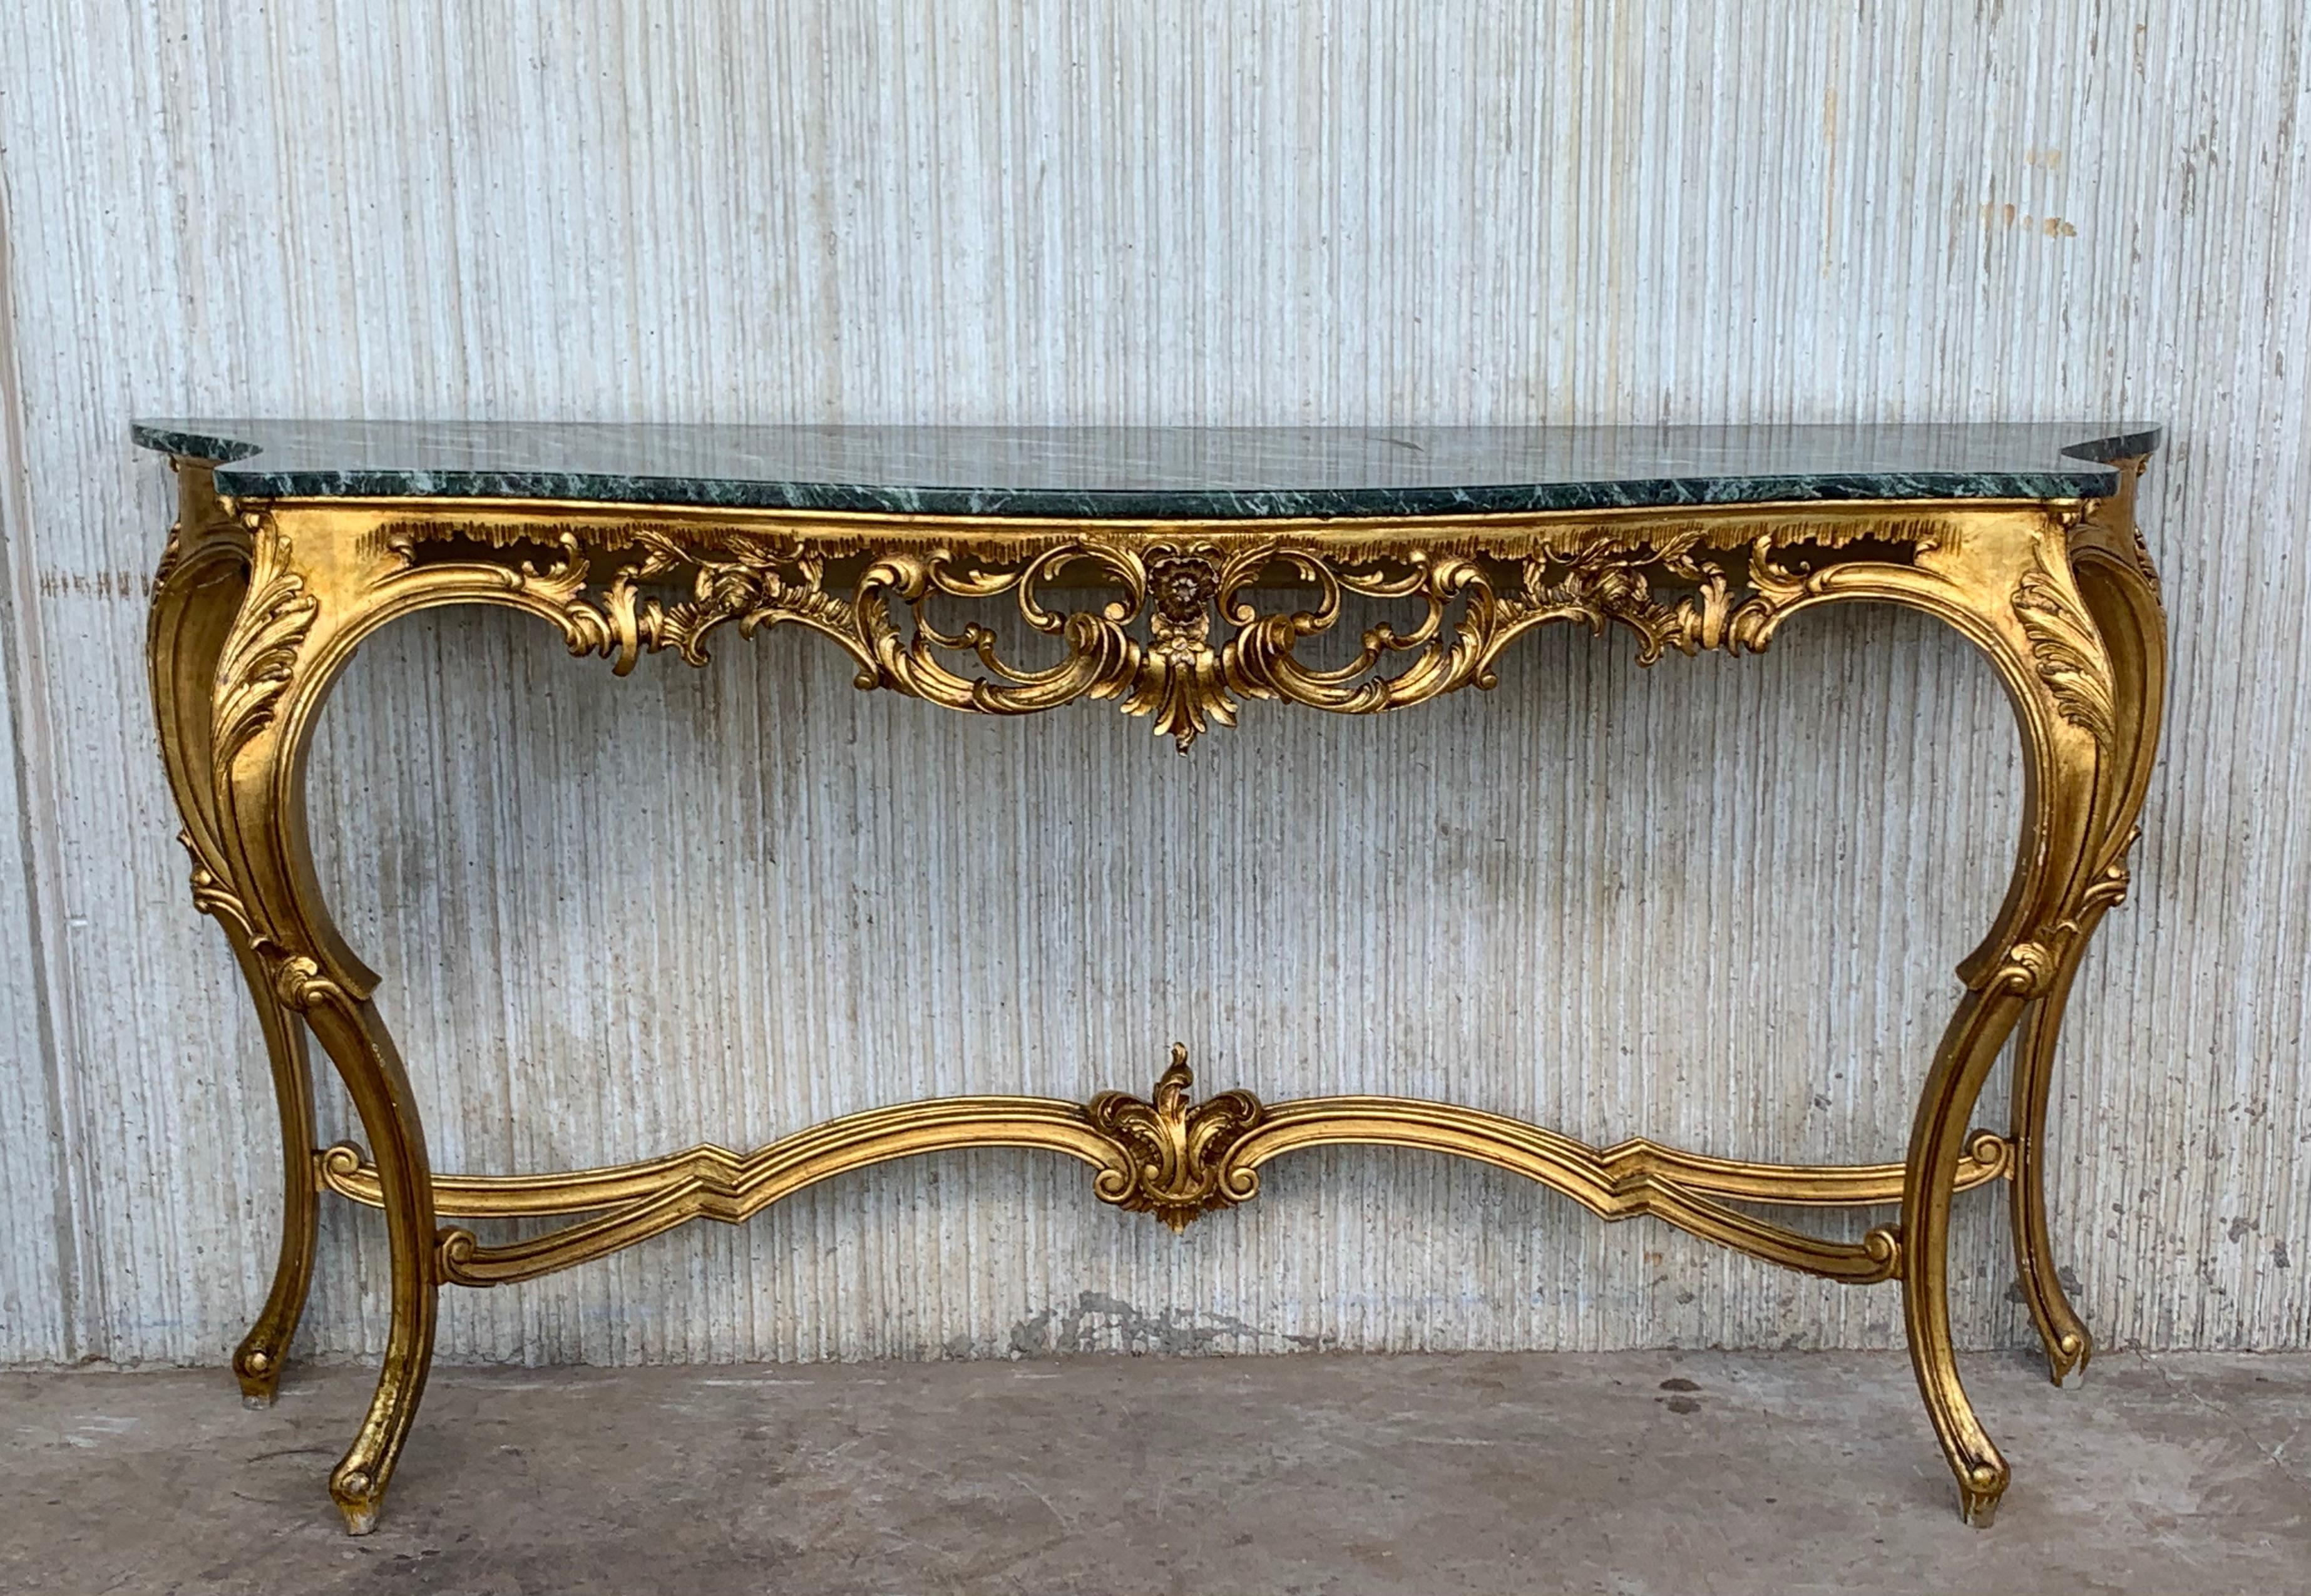 A magnificent and large scale Spanish 20th century Baroque style, ormolu and green marble freestanding console. The most impressive console is raised by elegant scrolled acanthus leaf feet below the powerful scrolled legs with richly carved flowers